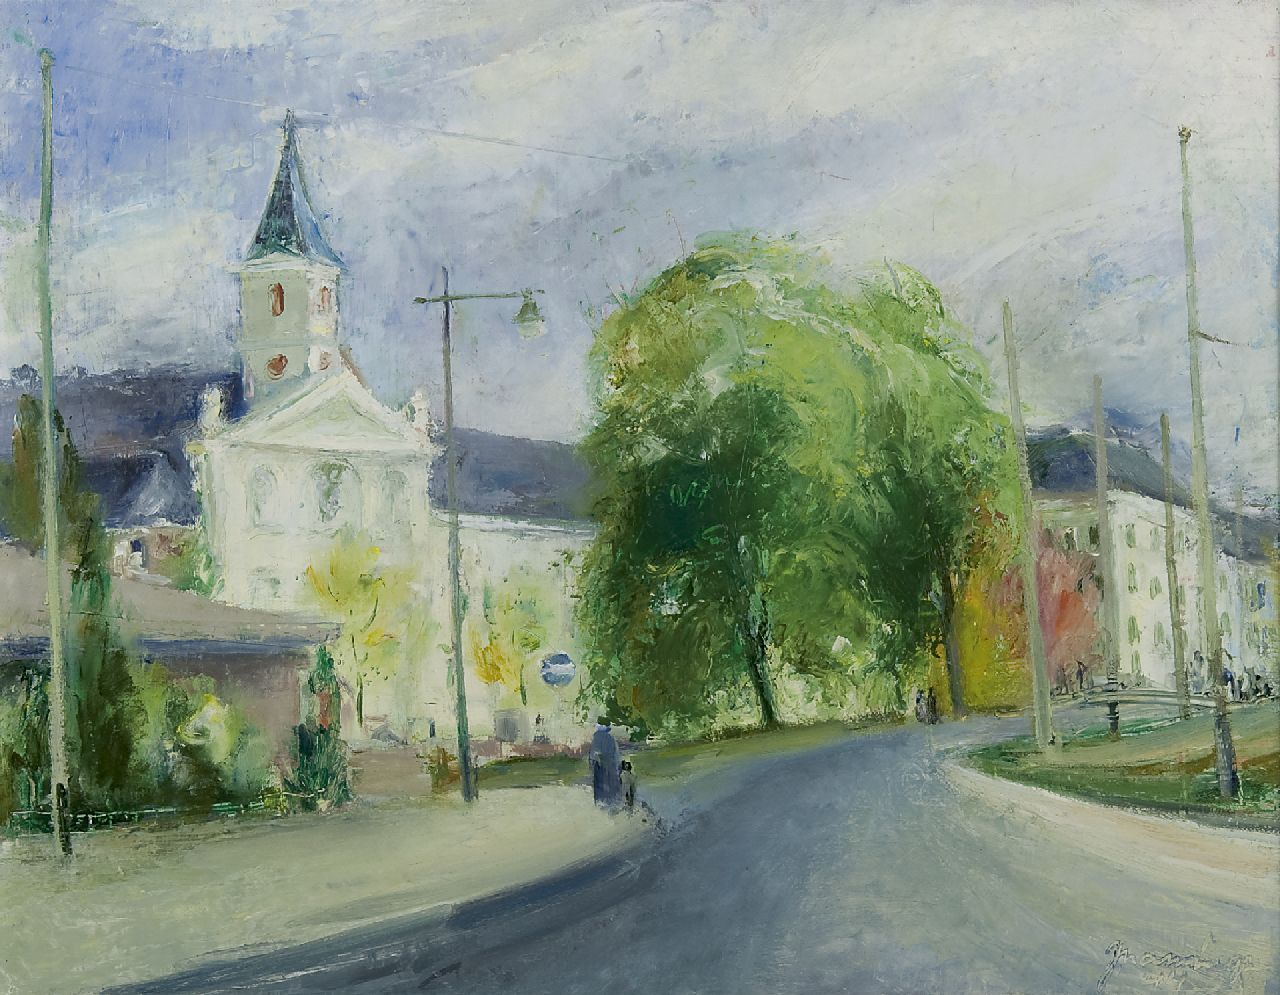 Nanninga J.  | Jacob 'Jaap' Nanninga | Paintings offered for sale | The Boskant church, The Hague, oil on canvas 42.3 x 54.6 cm, signed l.r. and dated '44